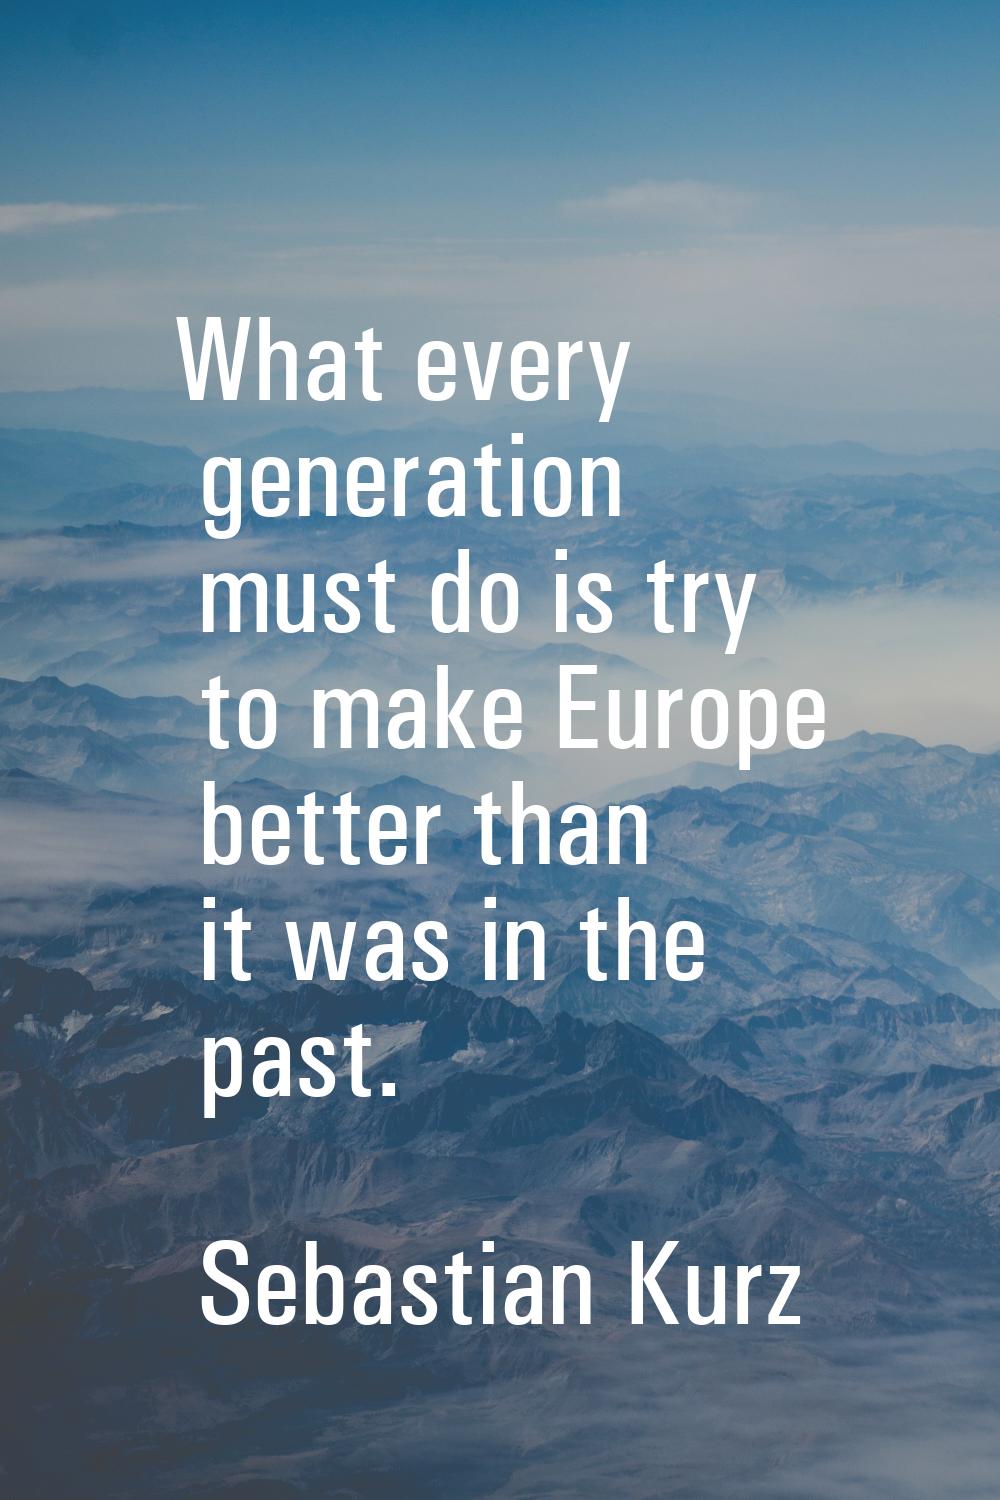 What every generation must do is try to make Europe better than it was in the past.